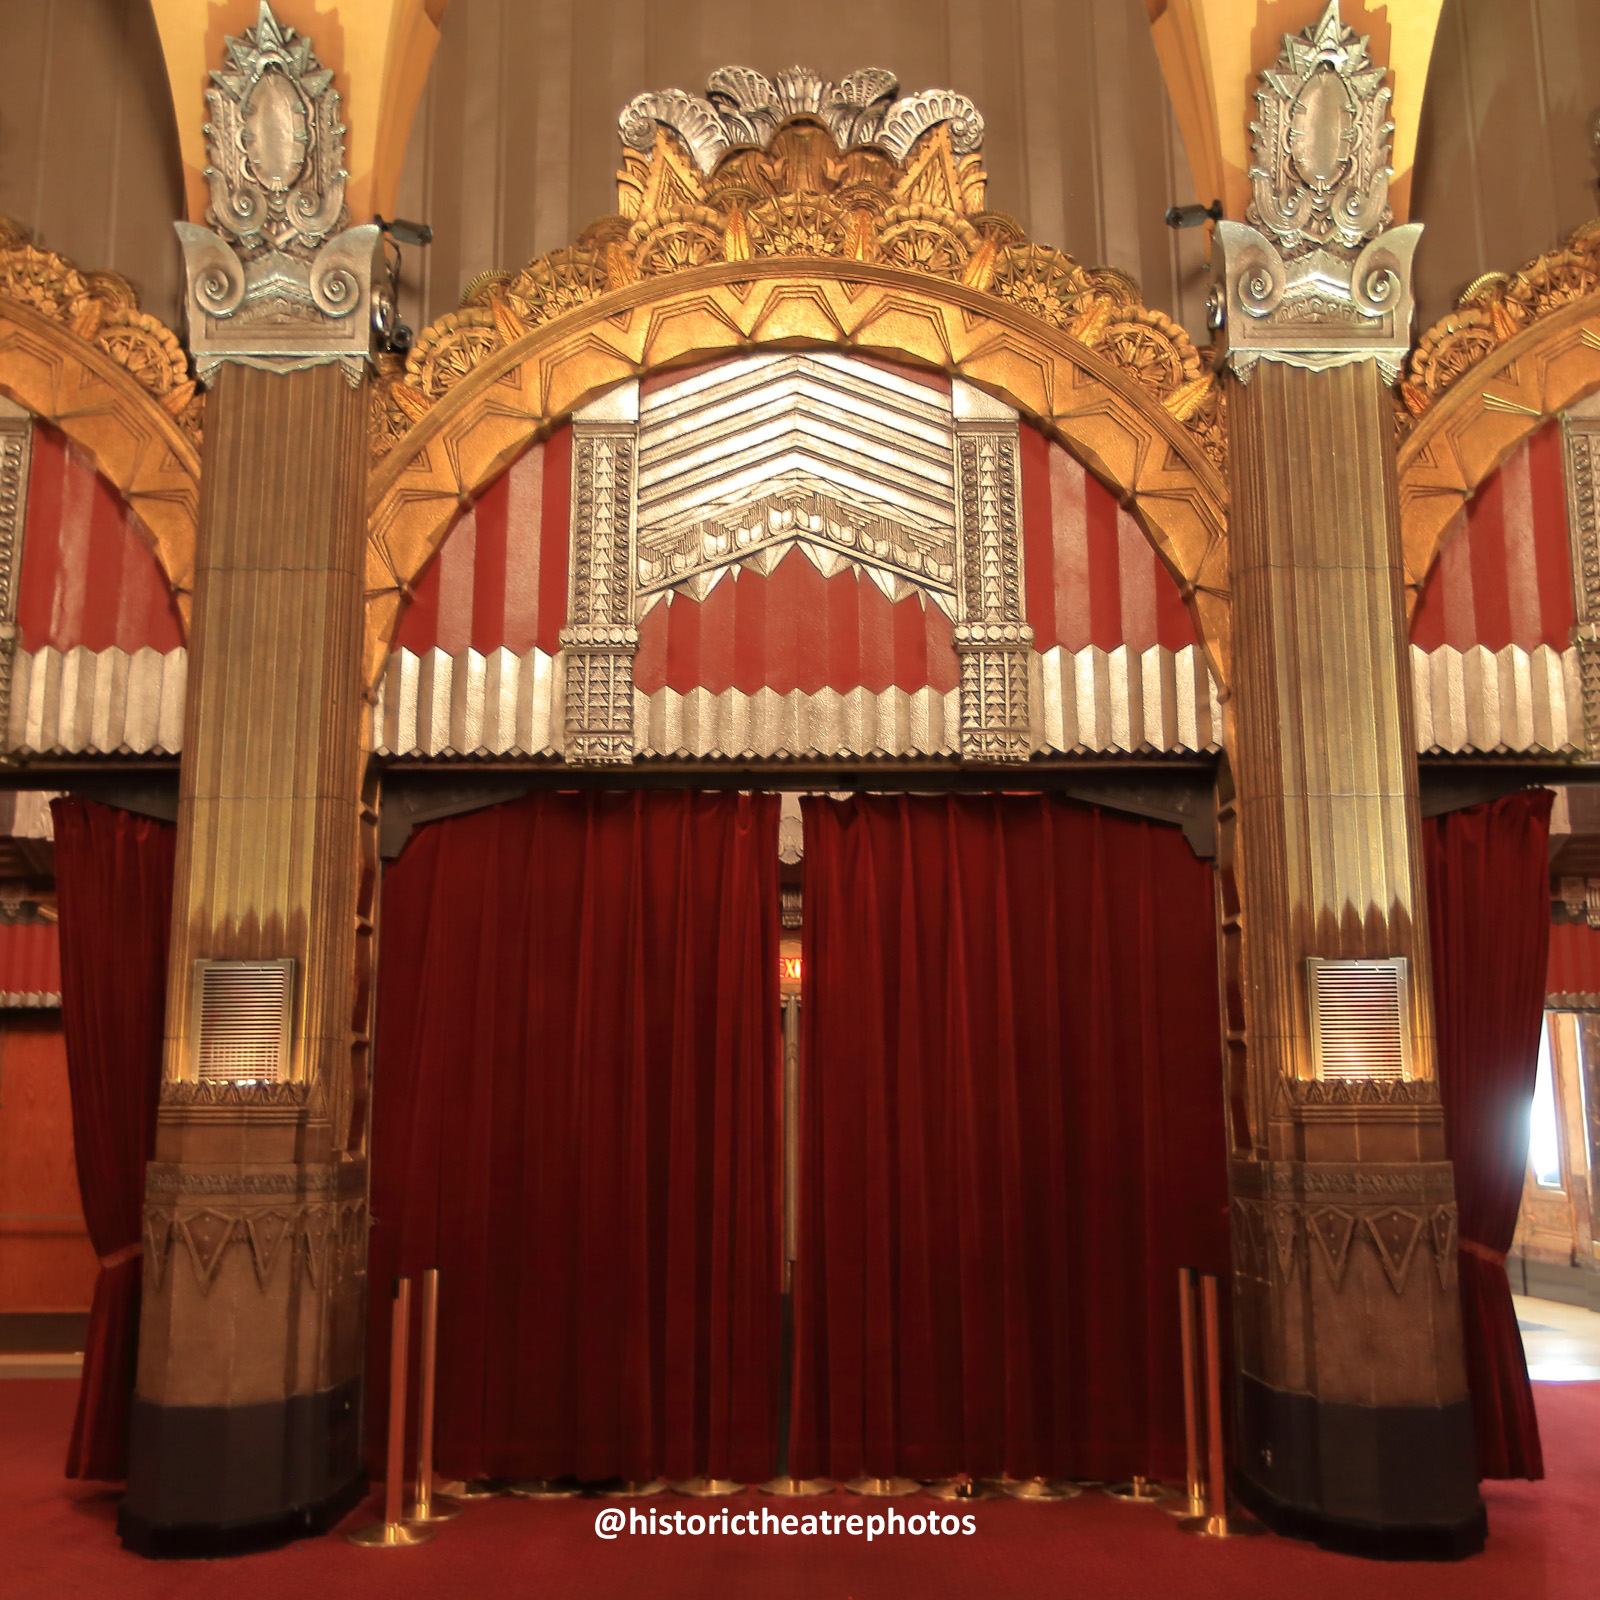 Pantages Theatre, Hollywood: Grand Lobby Entrance from Exterior